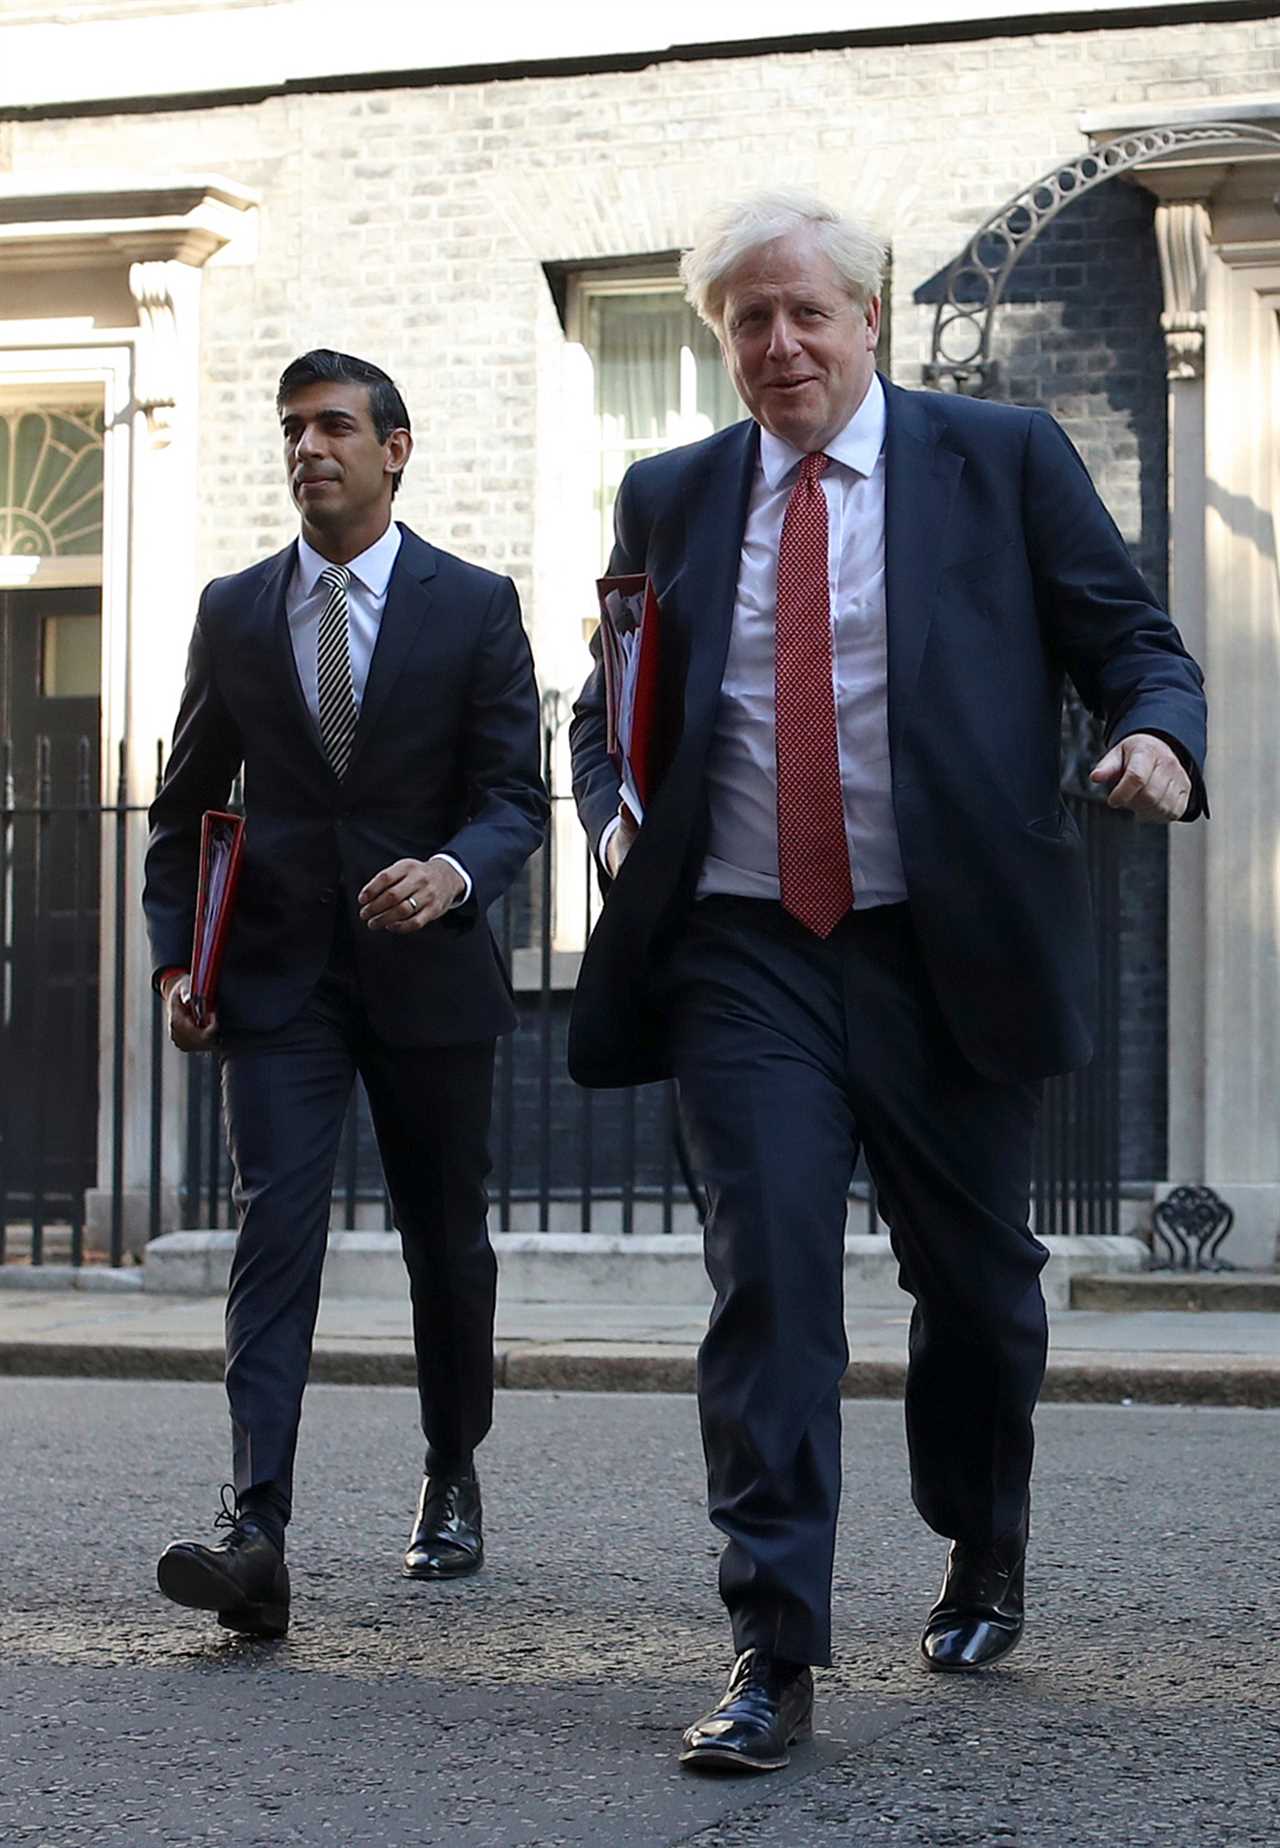 Boris Johnson WILL self-isolate in quick U-turn after fury at using ‘VIP’ pilot scheme to dodge ping over Javid’s Covid